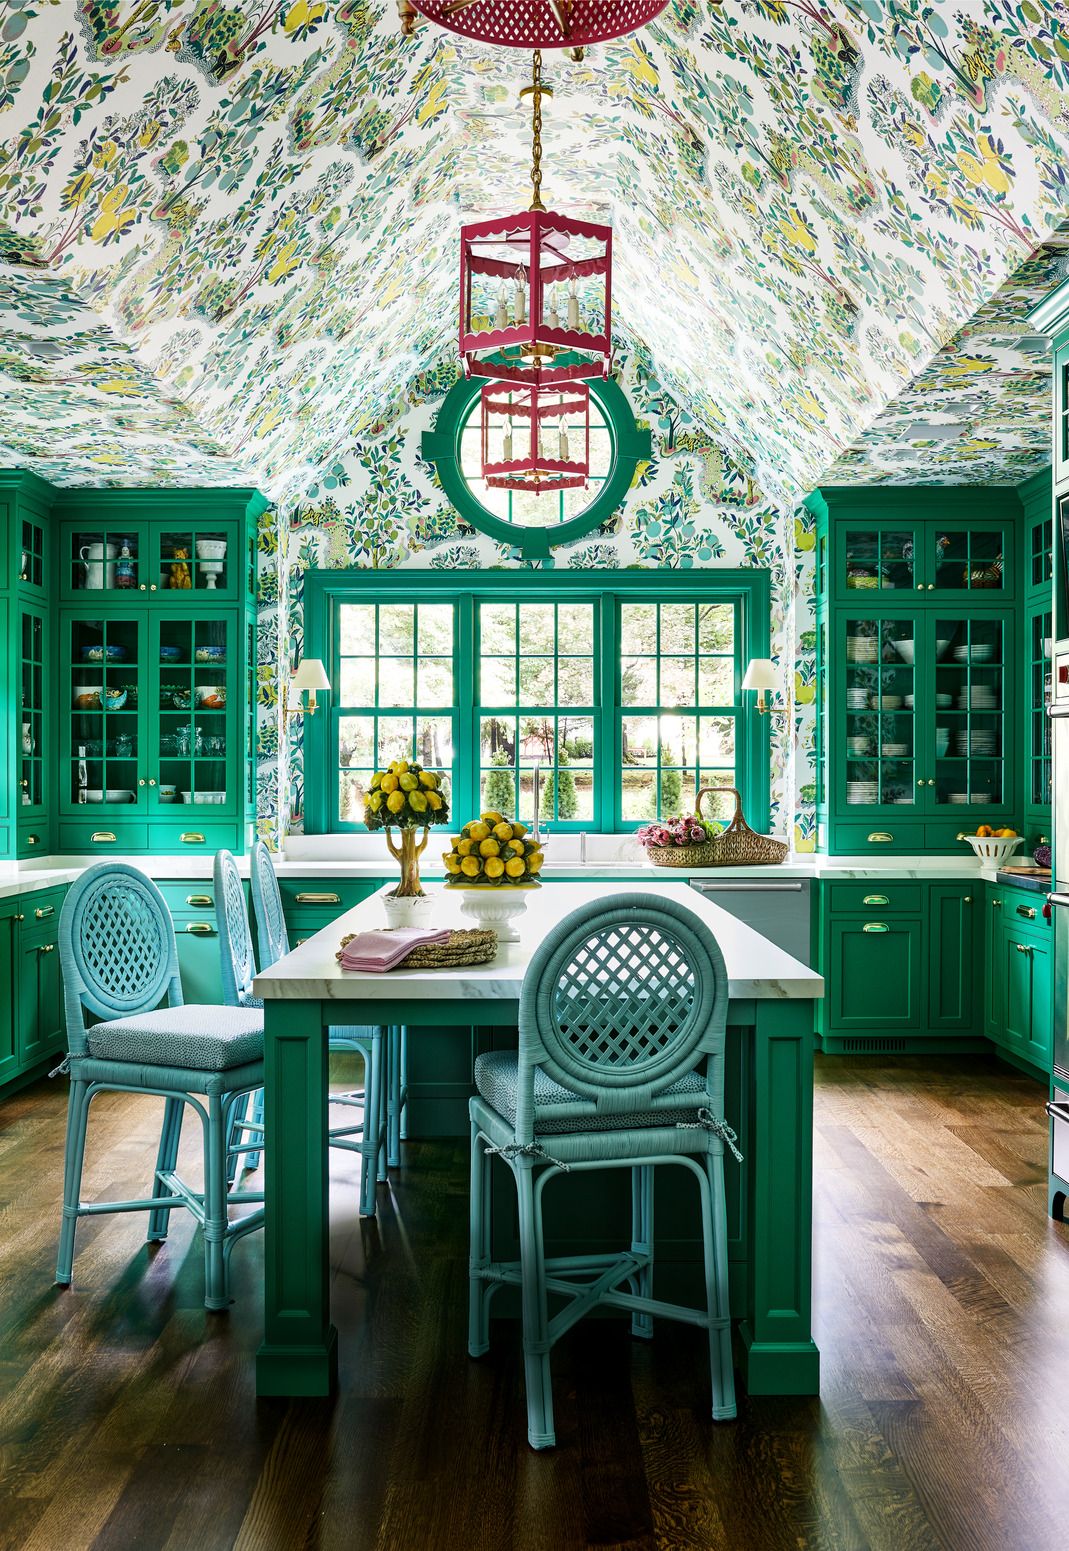 the custom green cabinetry in this kitchen by designer molly singer complements the wallpaper by schumacher ©Stacy Zarin Goldberg